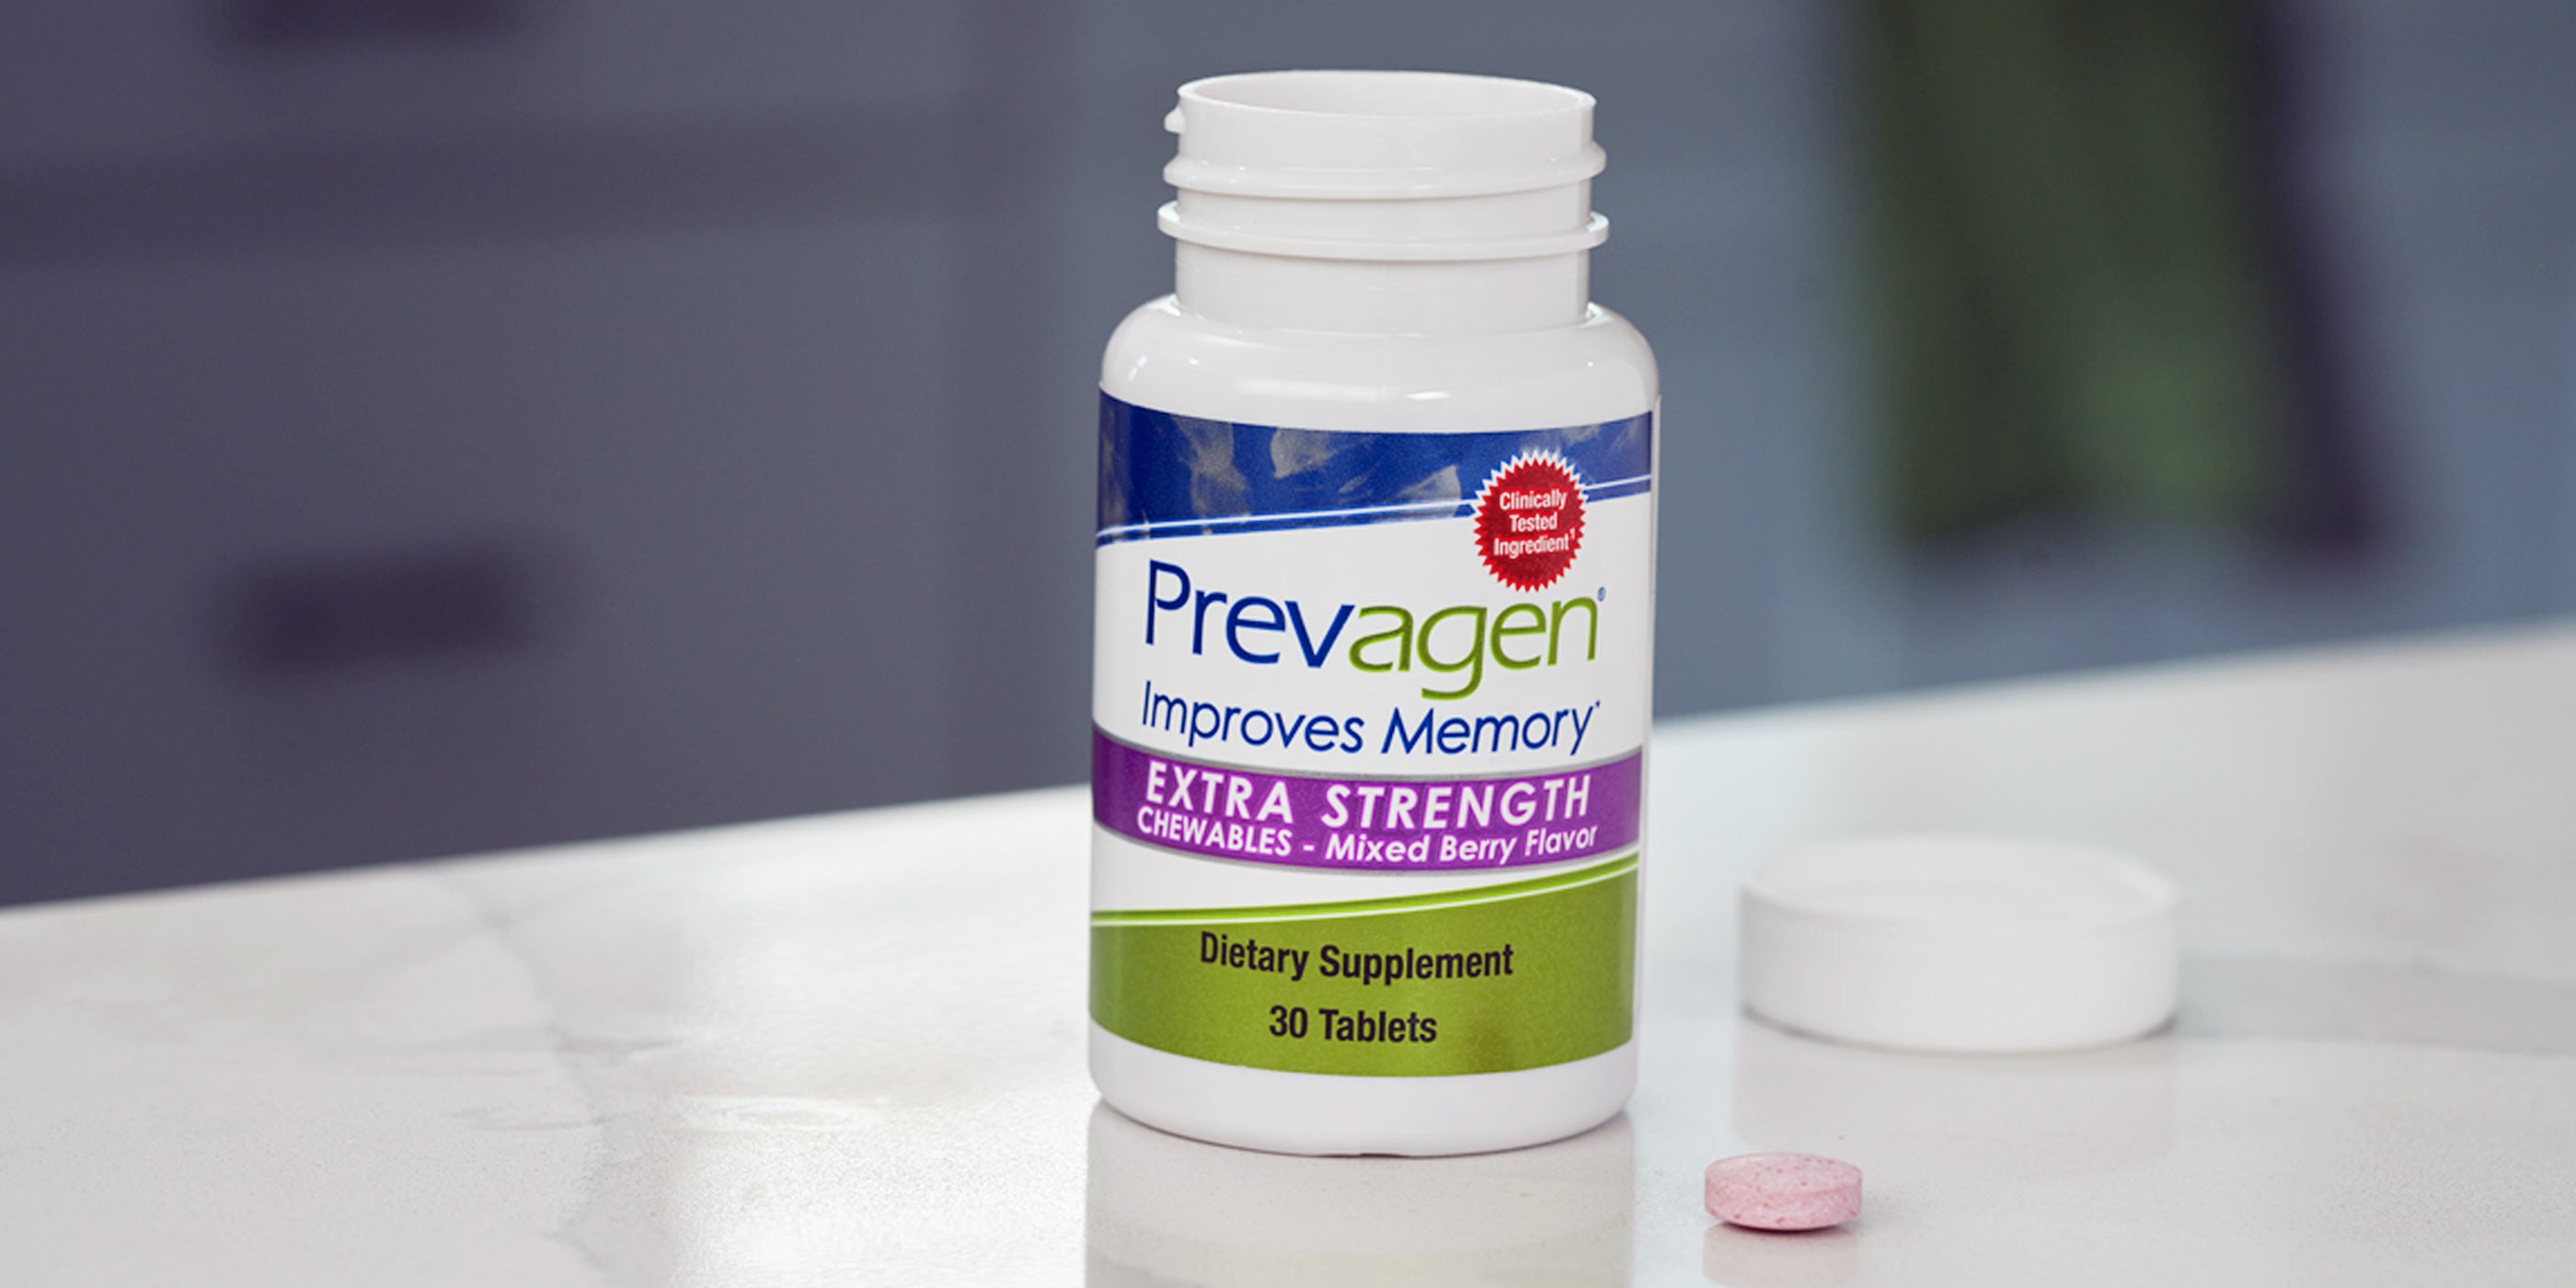 Bottle of Prevagen extra Strength Mixed Berry Chewables on kitchen counter